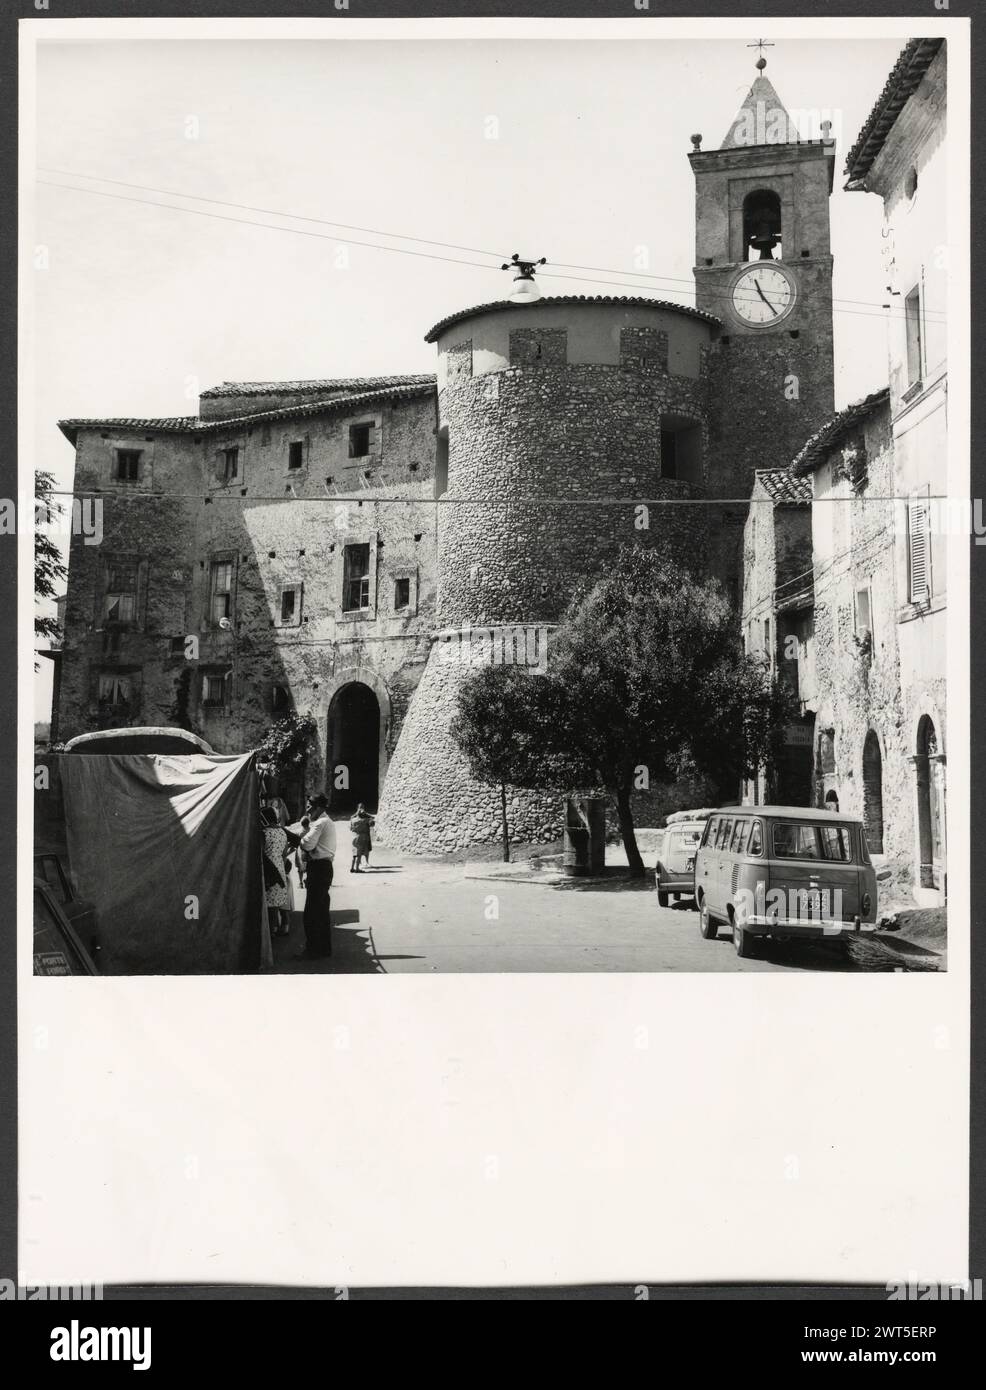 Lazio Rieti Torricella in Sabina Borgo Medievale. Hutzel, Max 1960-1990 Medieval: Architecture. The entrance to the medieval town opens upon a large circular tower dating to the 12th century, which formed a part of the castle of the Brancaleone. German-born photographer and scholar Max Hutzel (1911-1988) photographed in Italy from the early 1960s until his death. The result of this project, referred to by Hutzel as Foto Arte Minore, is thorough documentation of art historical development in Italy up to the 18th century, including objects of the Etruscans and the Romans, as well as early Mediev Stock Photo